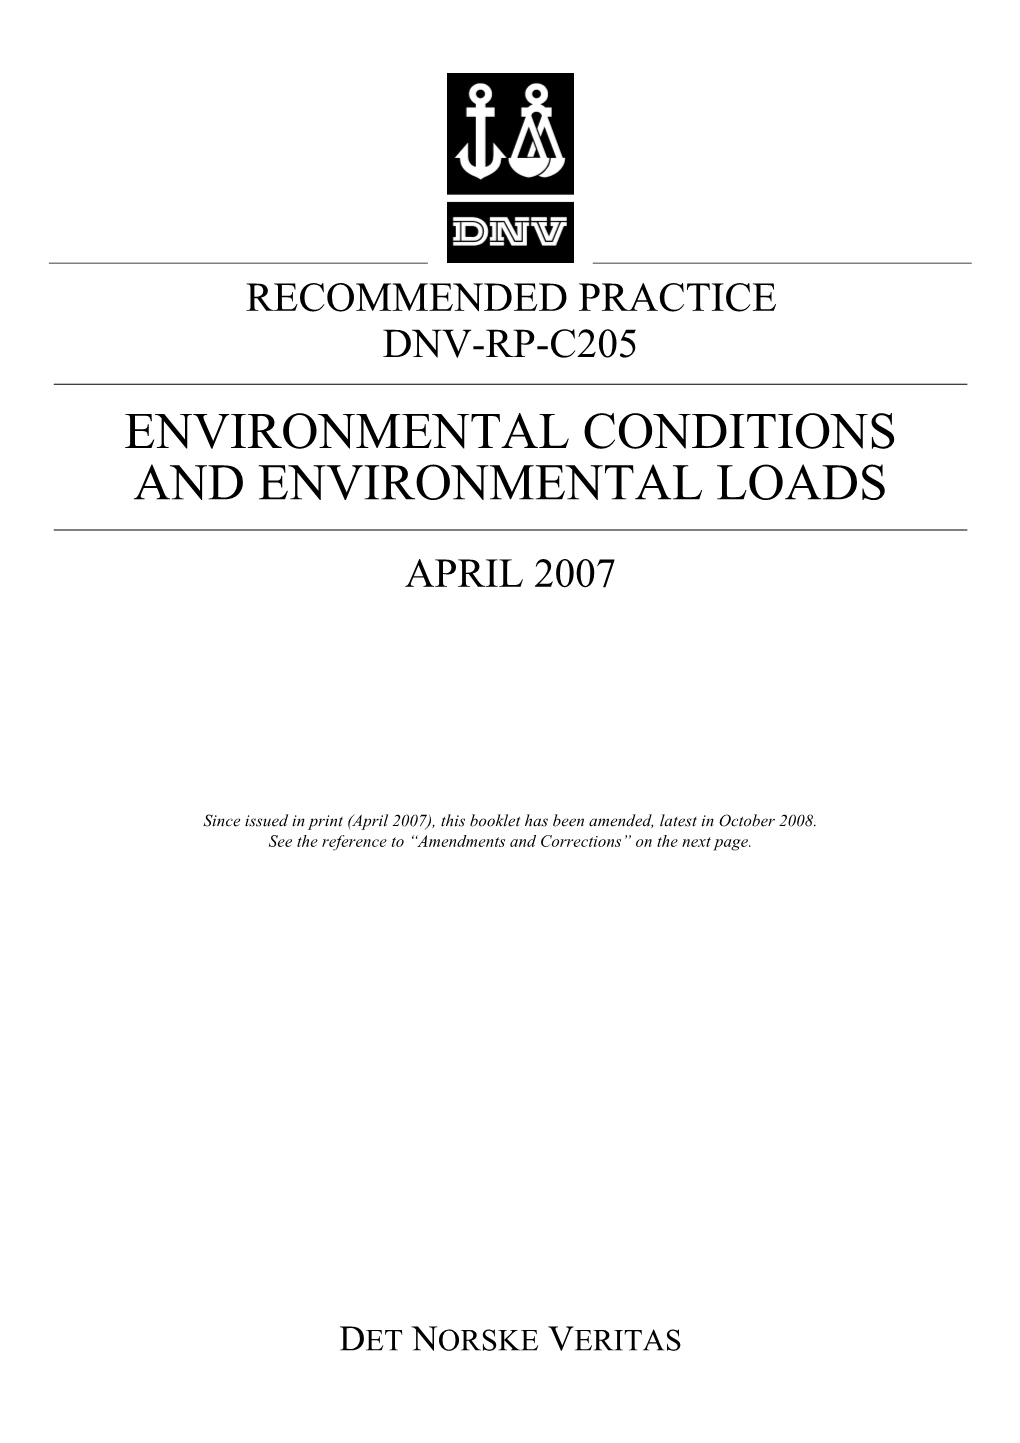 Dnv-Rp-C205 Environmental Conditions and Environmental Loads